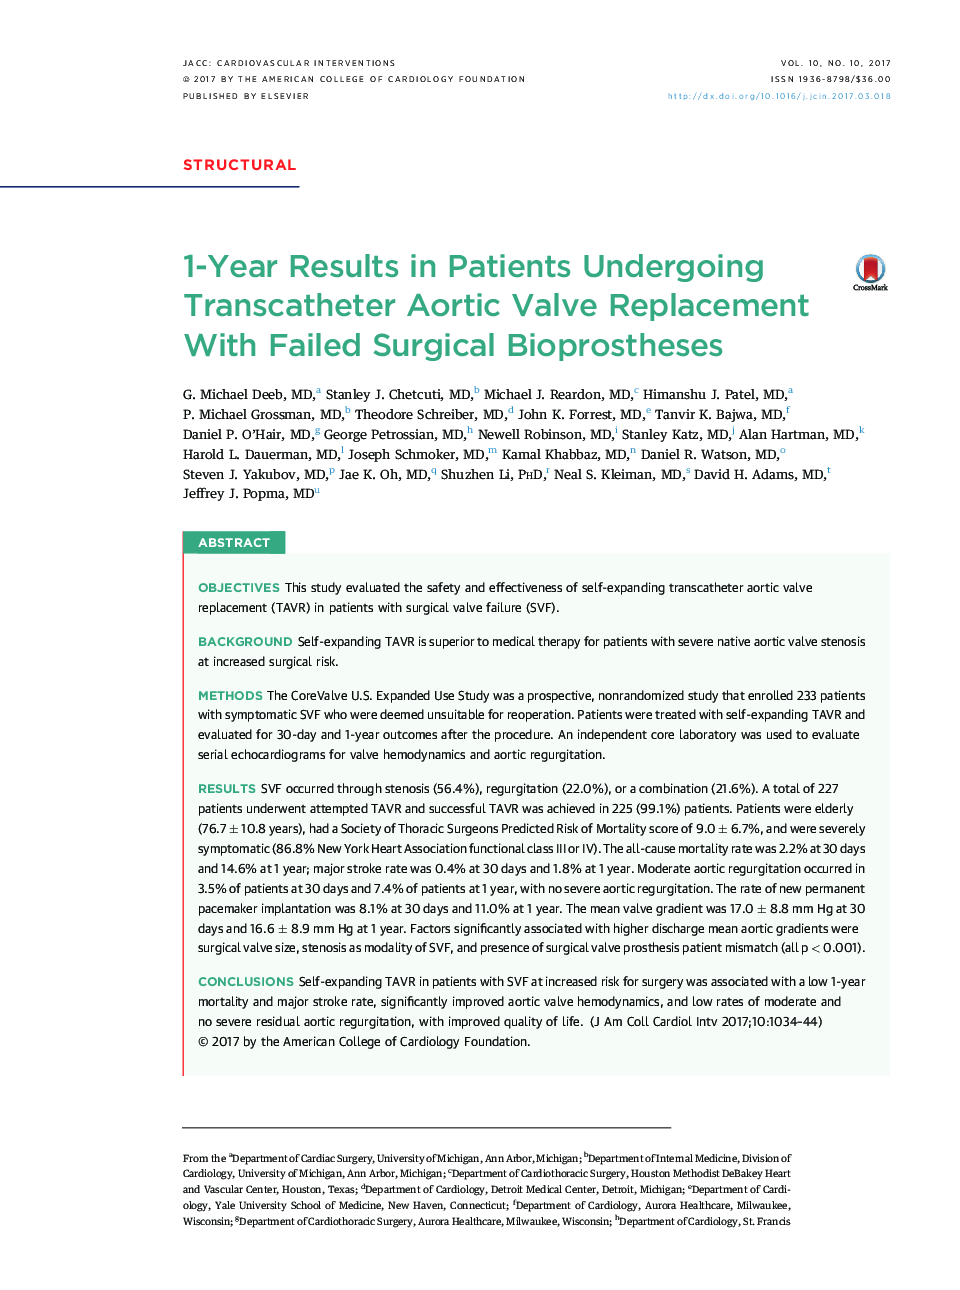 1-Year Results in Patients Undergoing Transcatheter Aortic Valve Replacement With Failed Surgical Bioprostheses